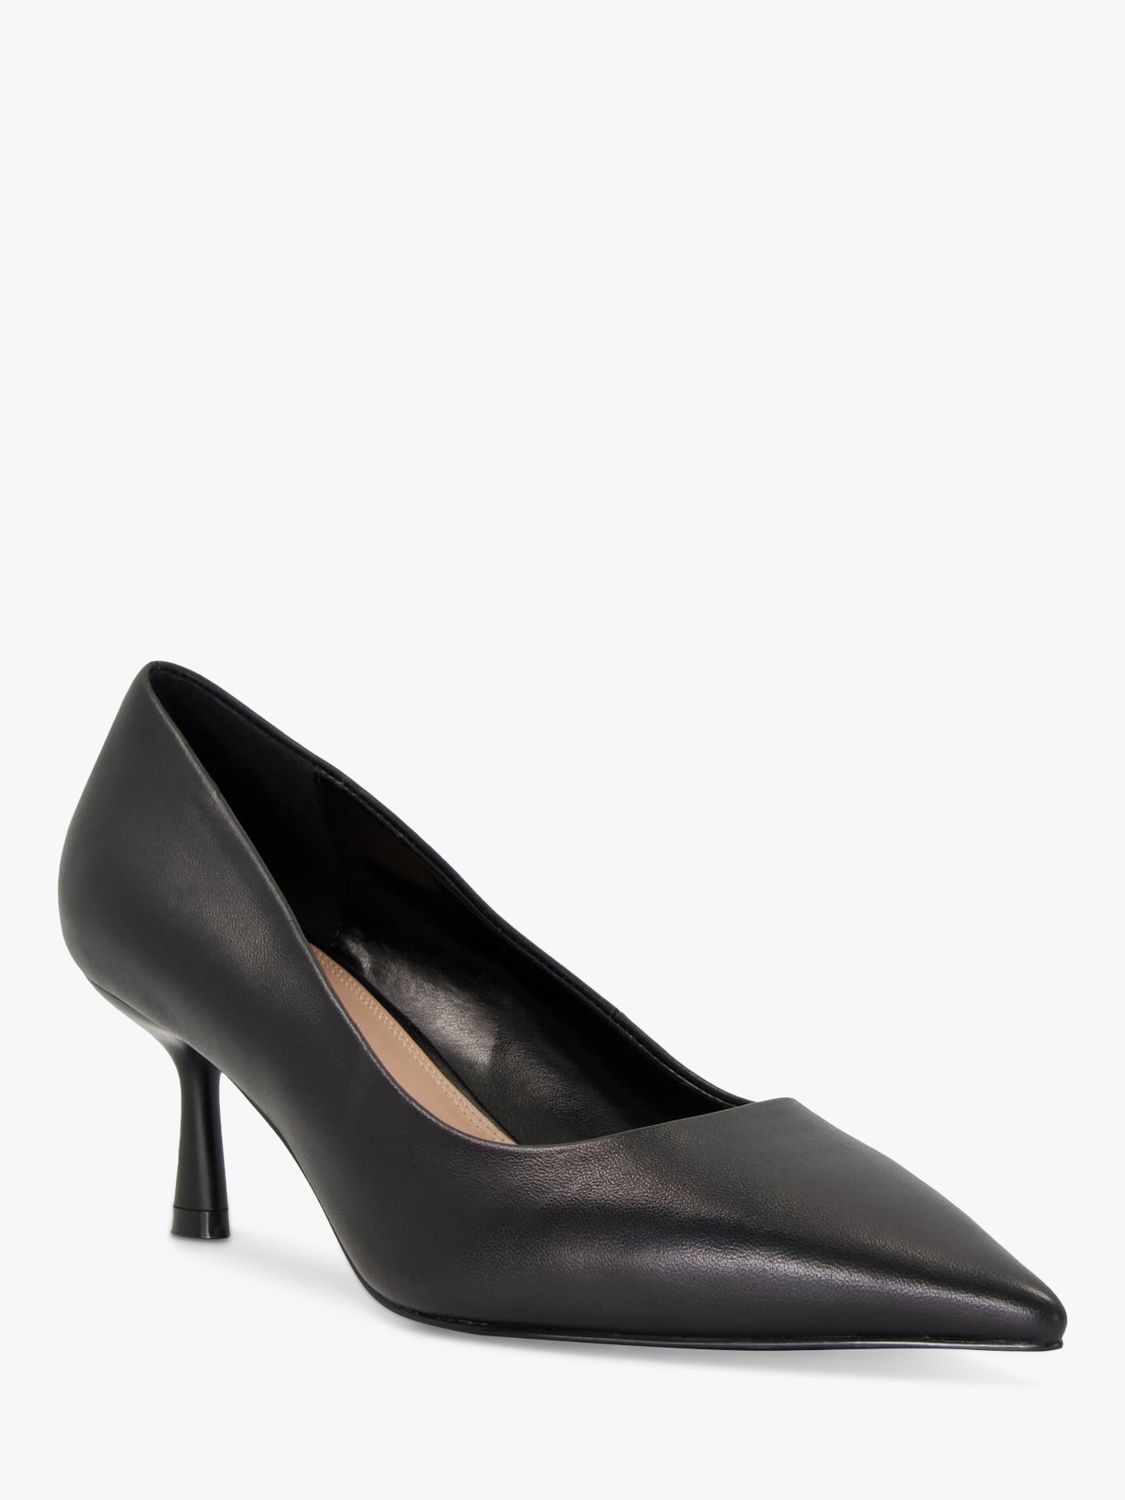 Dune Wide Fit Angelina Leather Court Shoes, Black at John Lewis & Partners